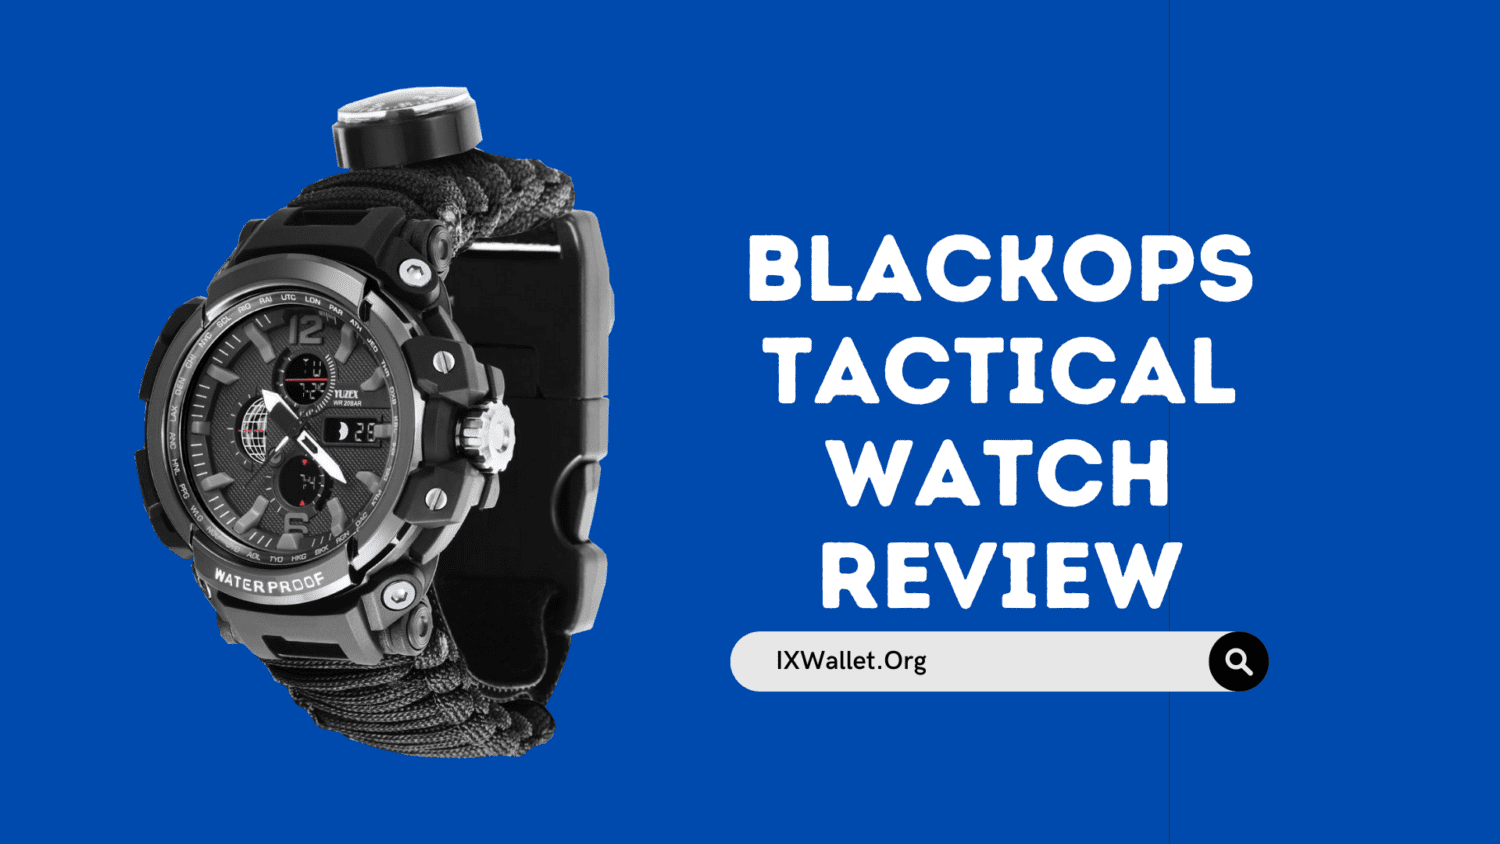 BlackOps Tactical Watch Review: Does It Really Help?